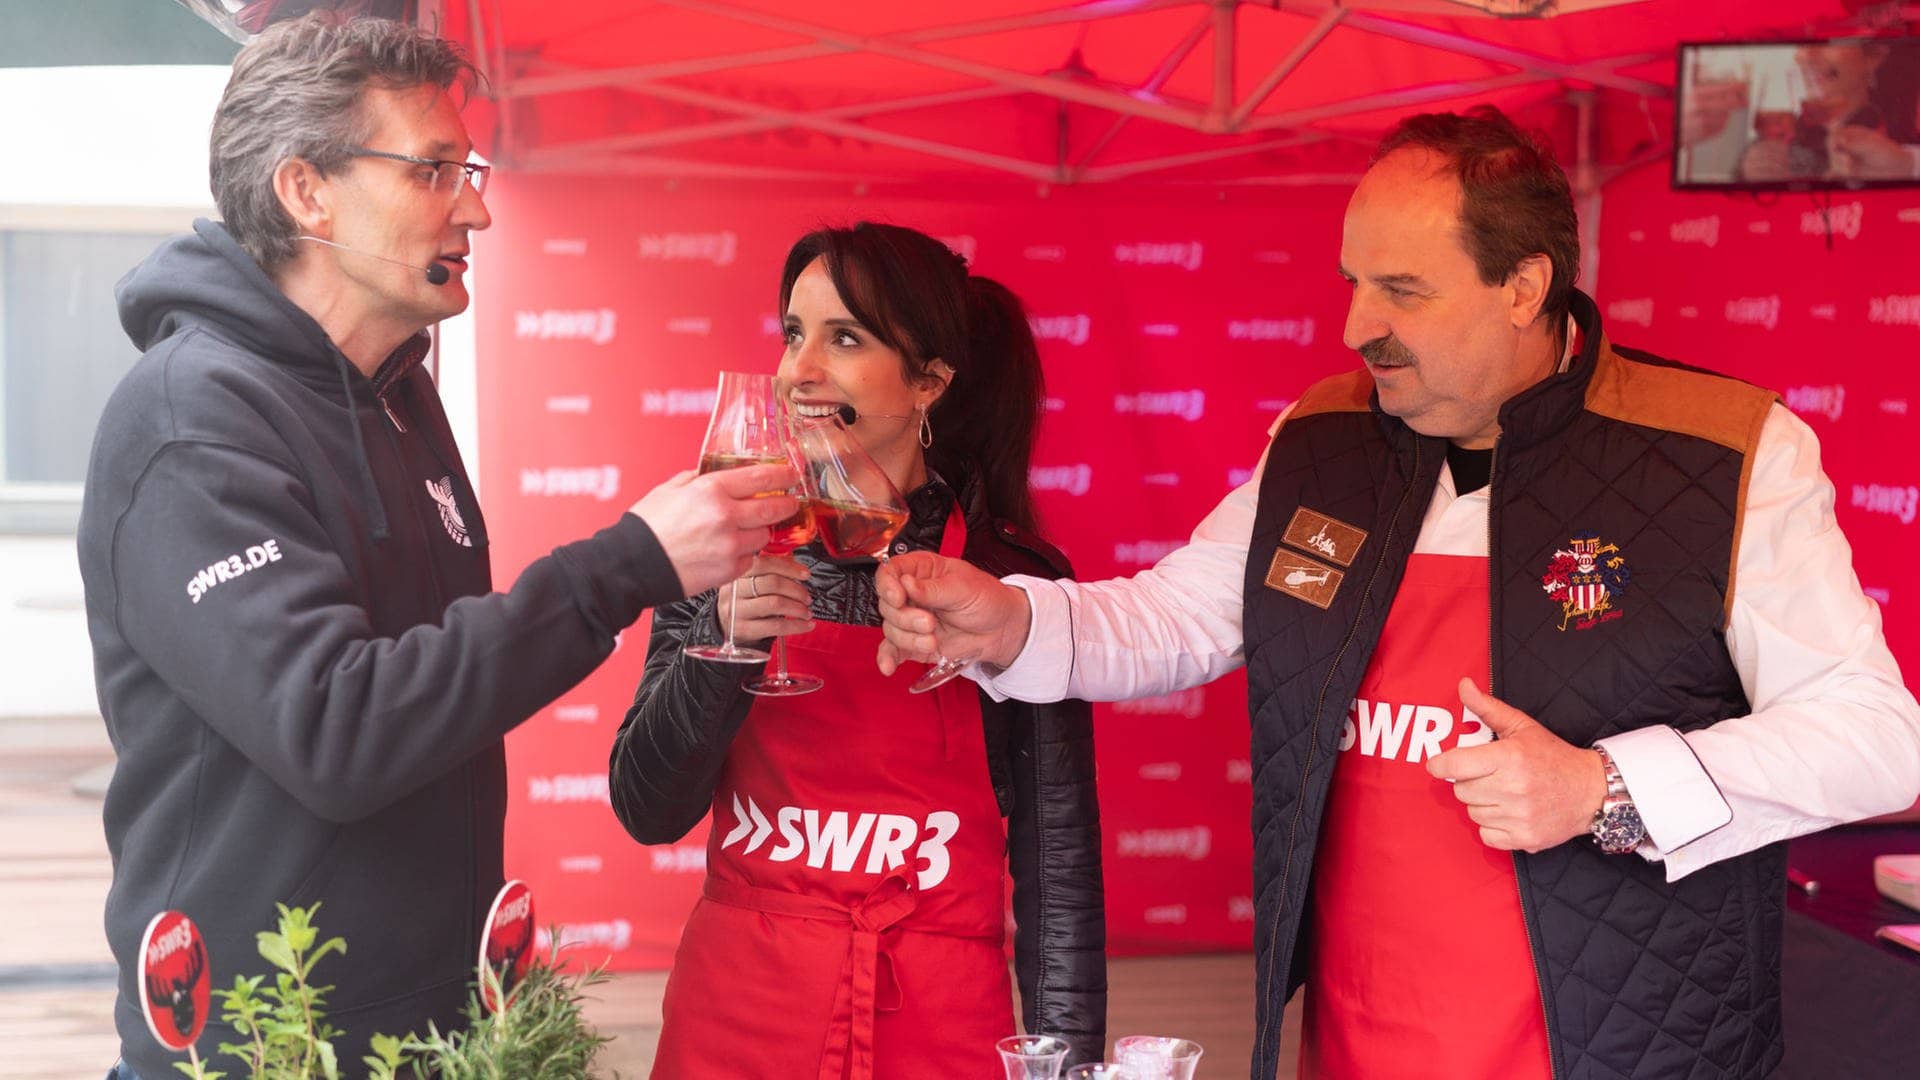 SWR3 Grillparty: Vorspeise (Foto: SWR3)